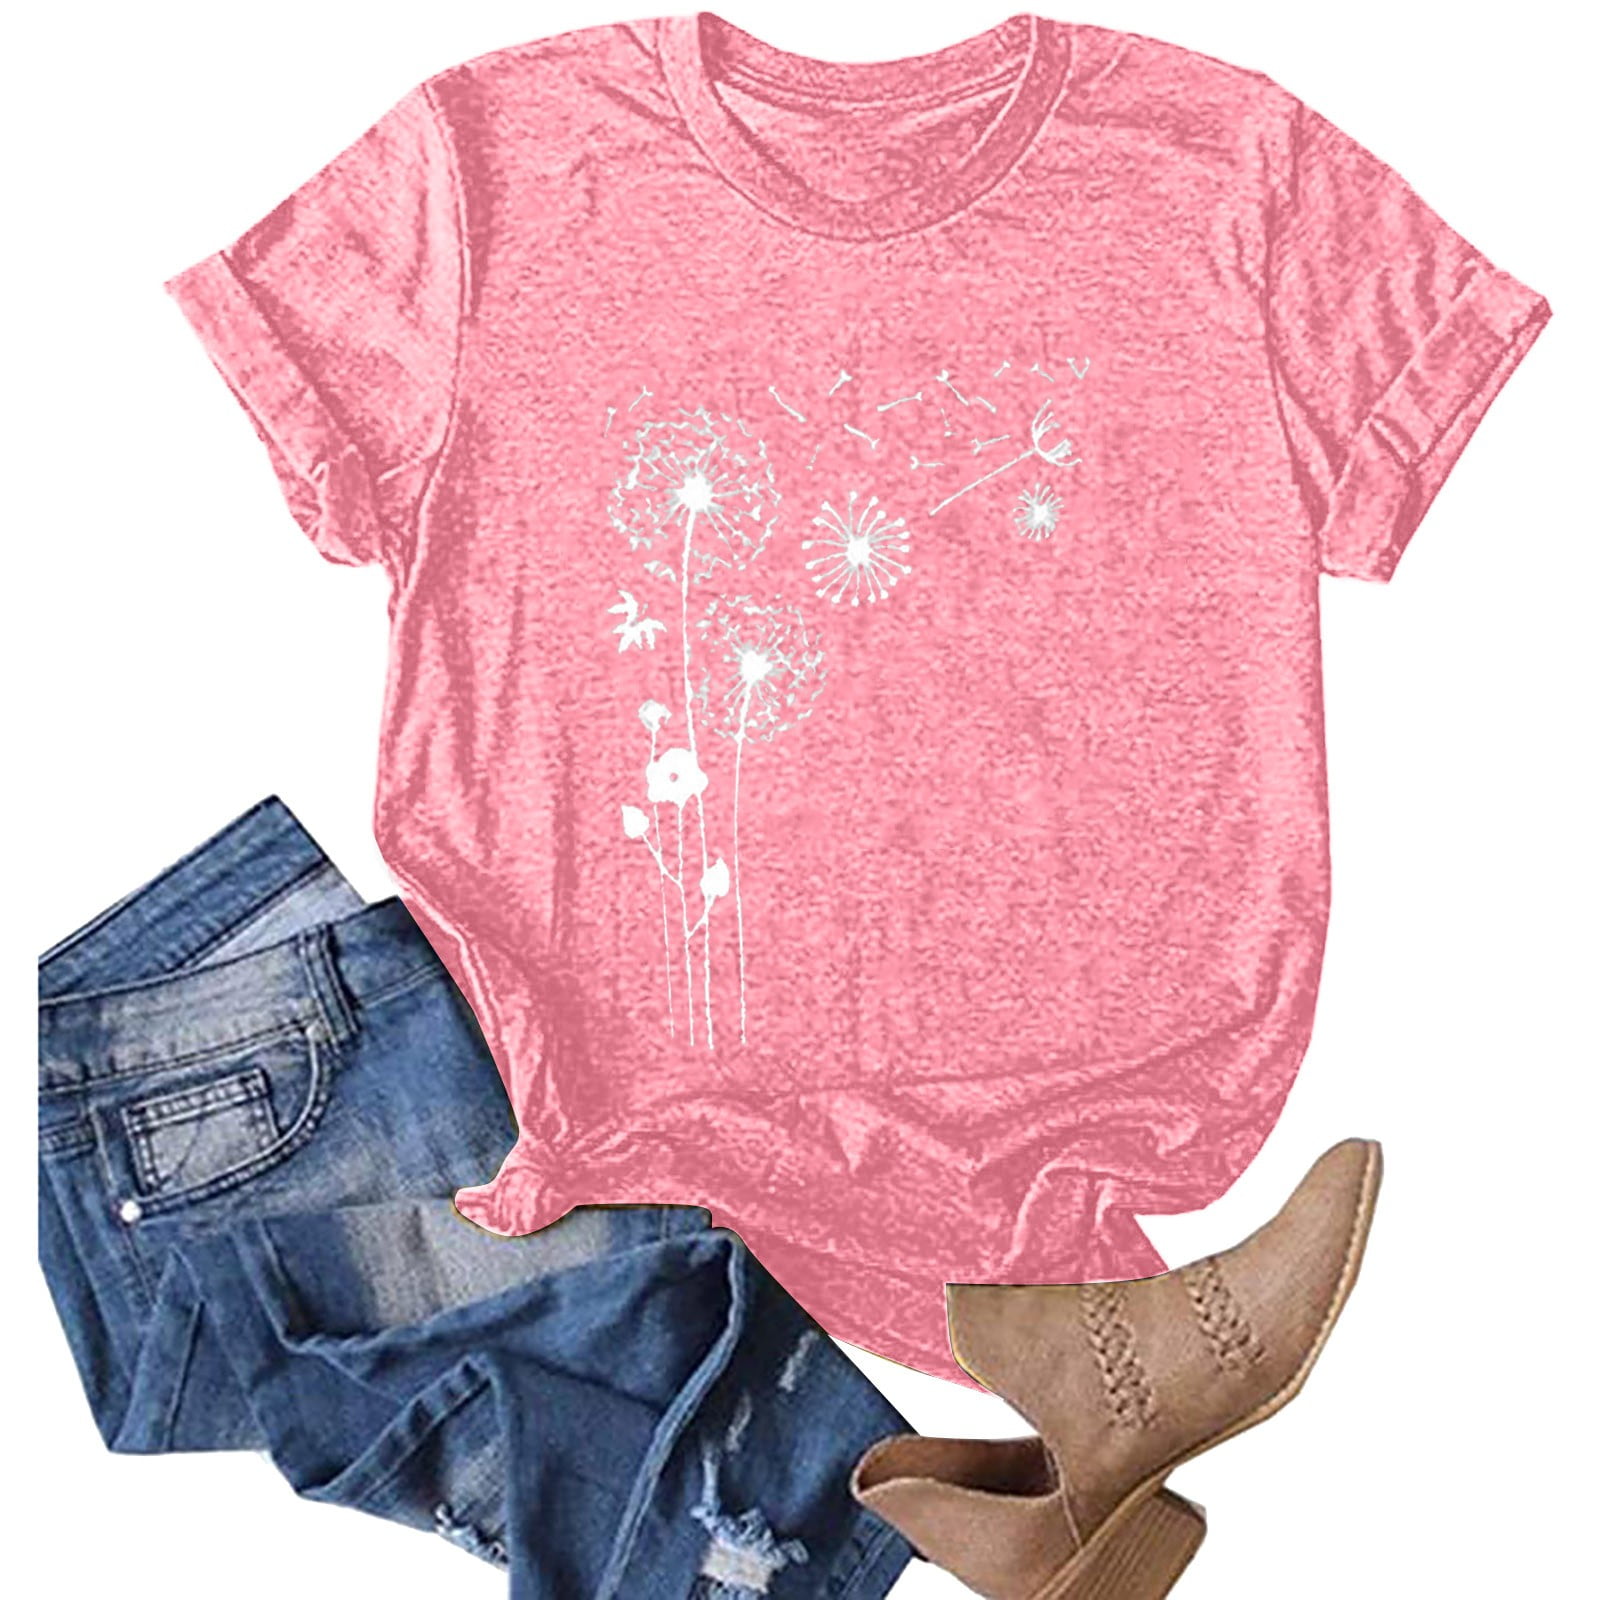 Now Trending! Graphic Tees Western Shirts for Women Junior Girls Clothes  Teen Girl Gifts Teen Girl Clothes Teen Gifts for Girls Ages 14-16 Trendy  Tops